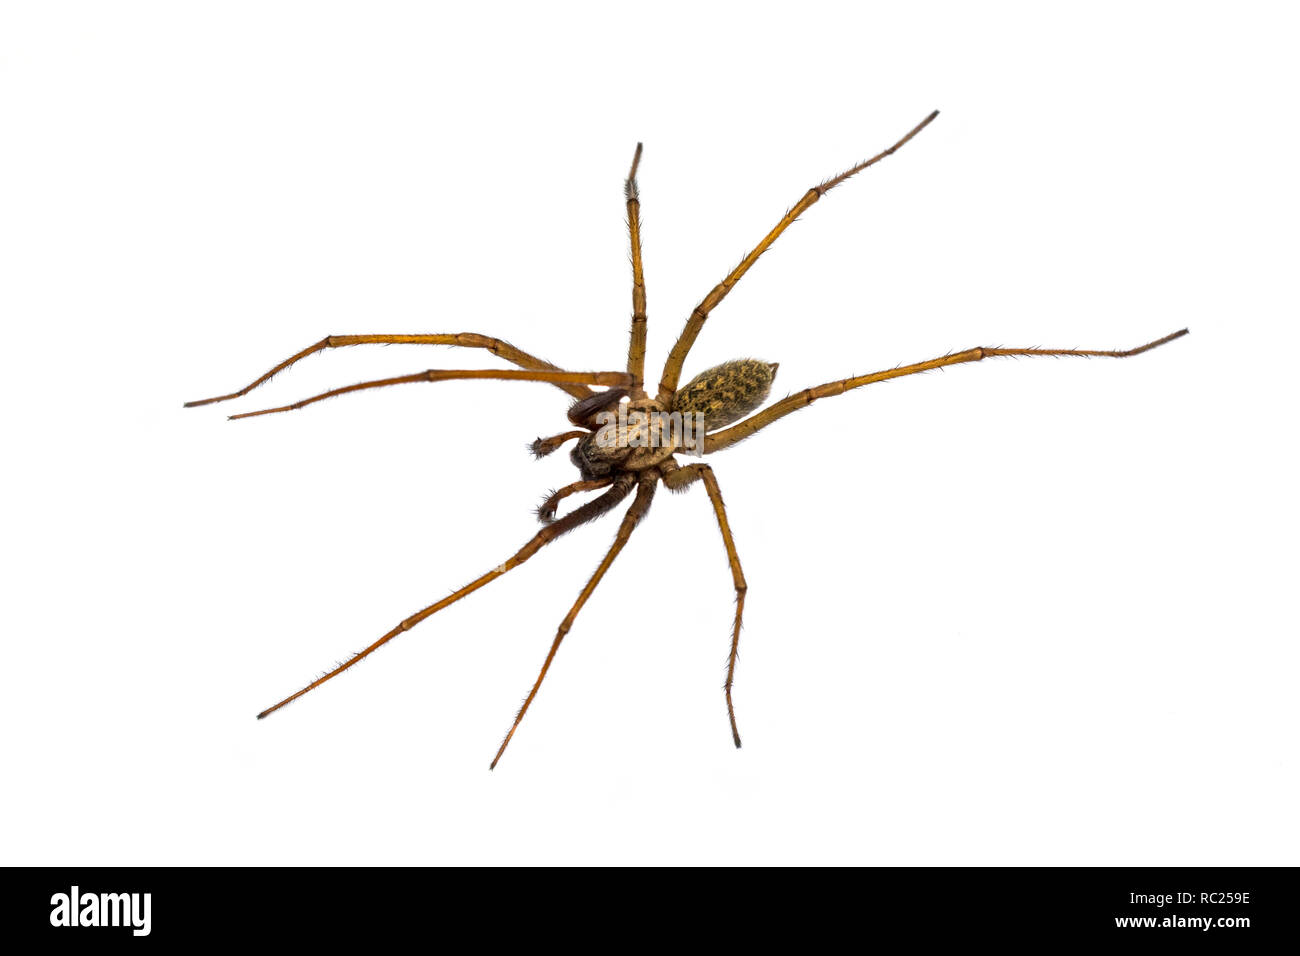 Giant house spider (Eratigena atrica) top down view of arachnid with long hairy legs isolated on white background Stock Photo